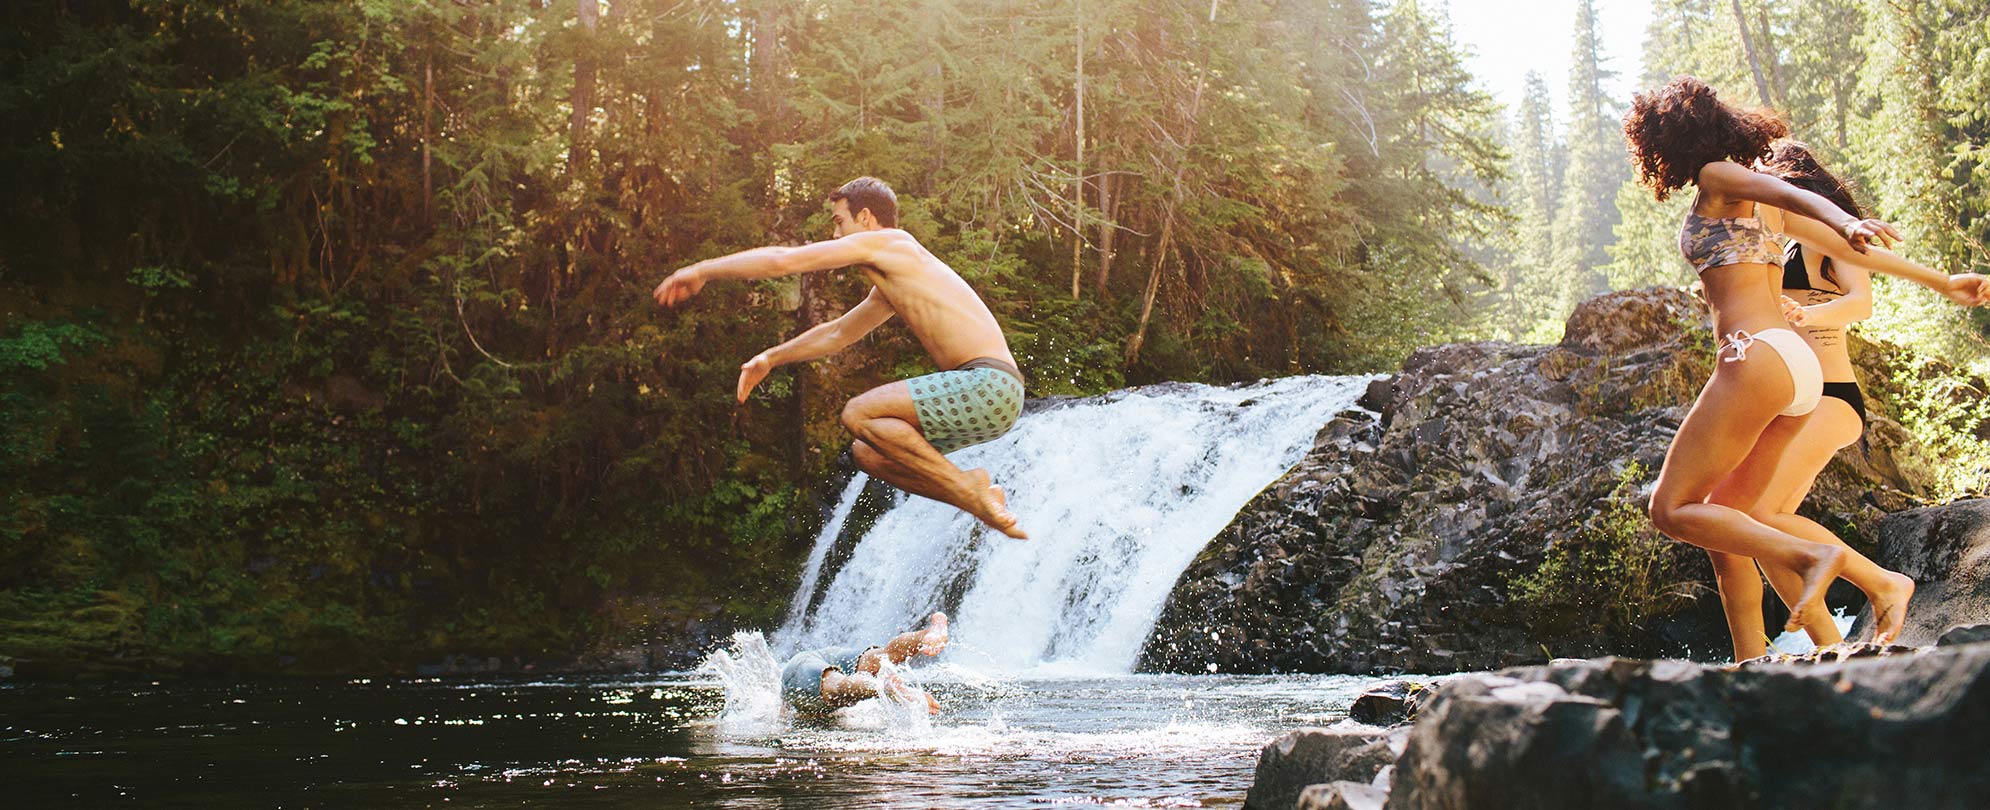 A group of friends jump into a swimming spot by a waterfall.